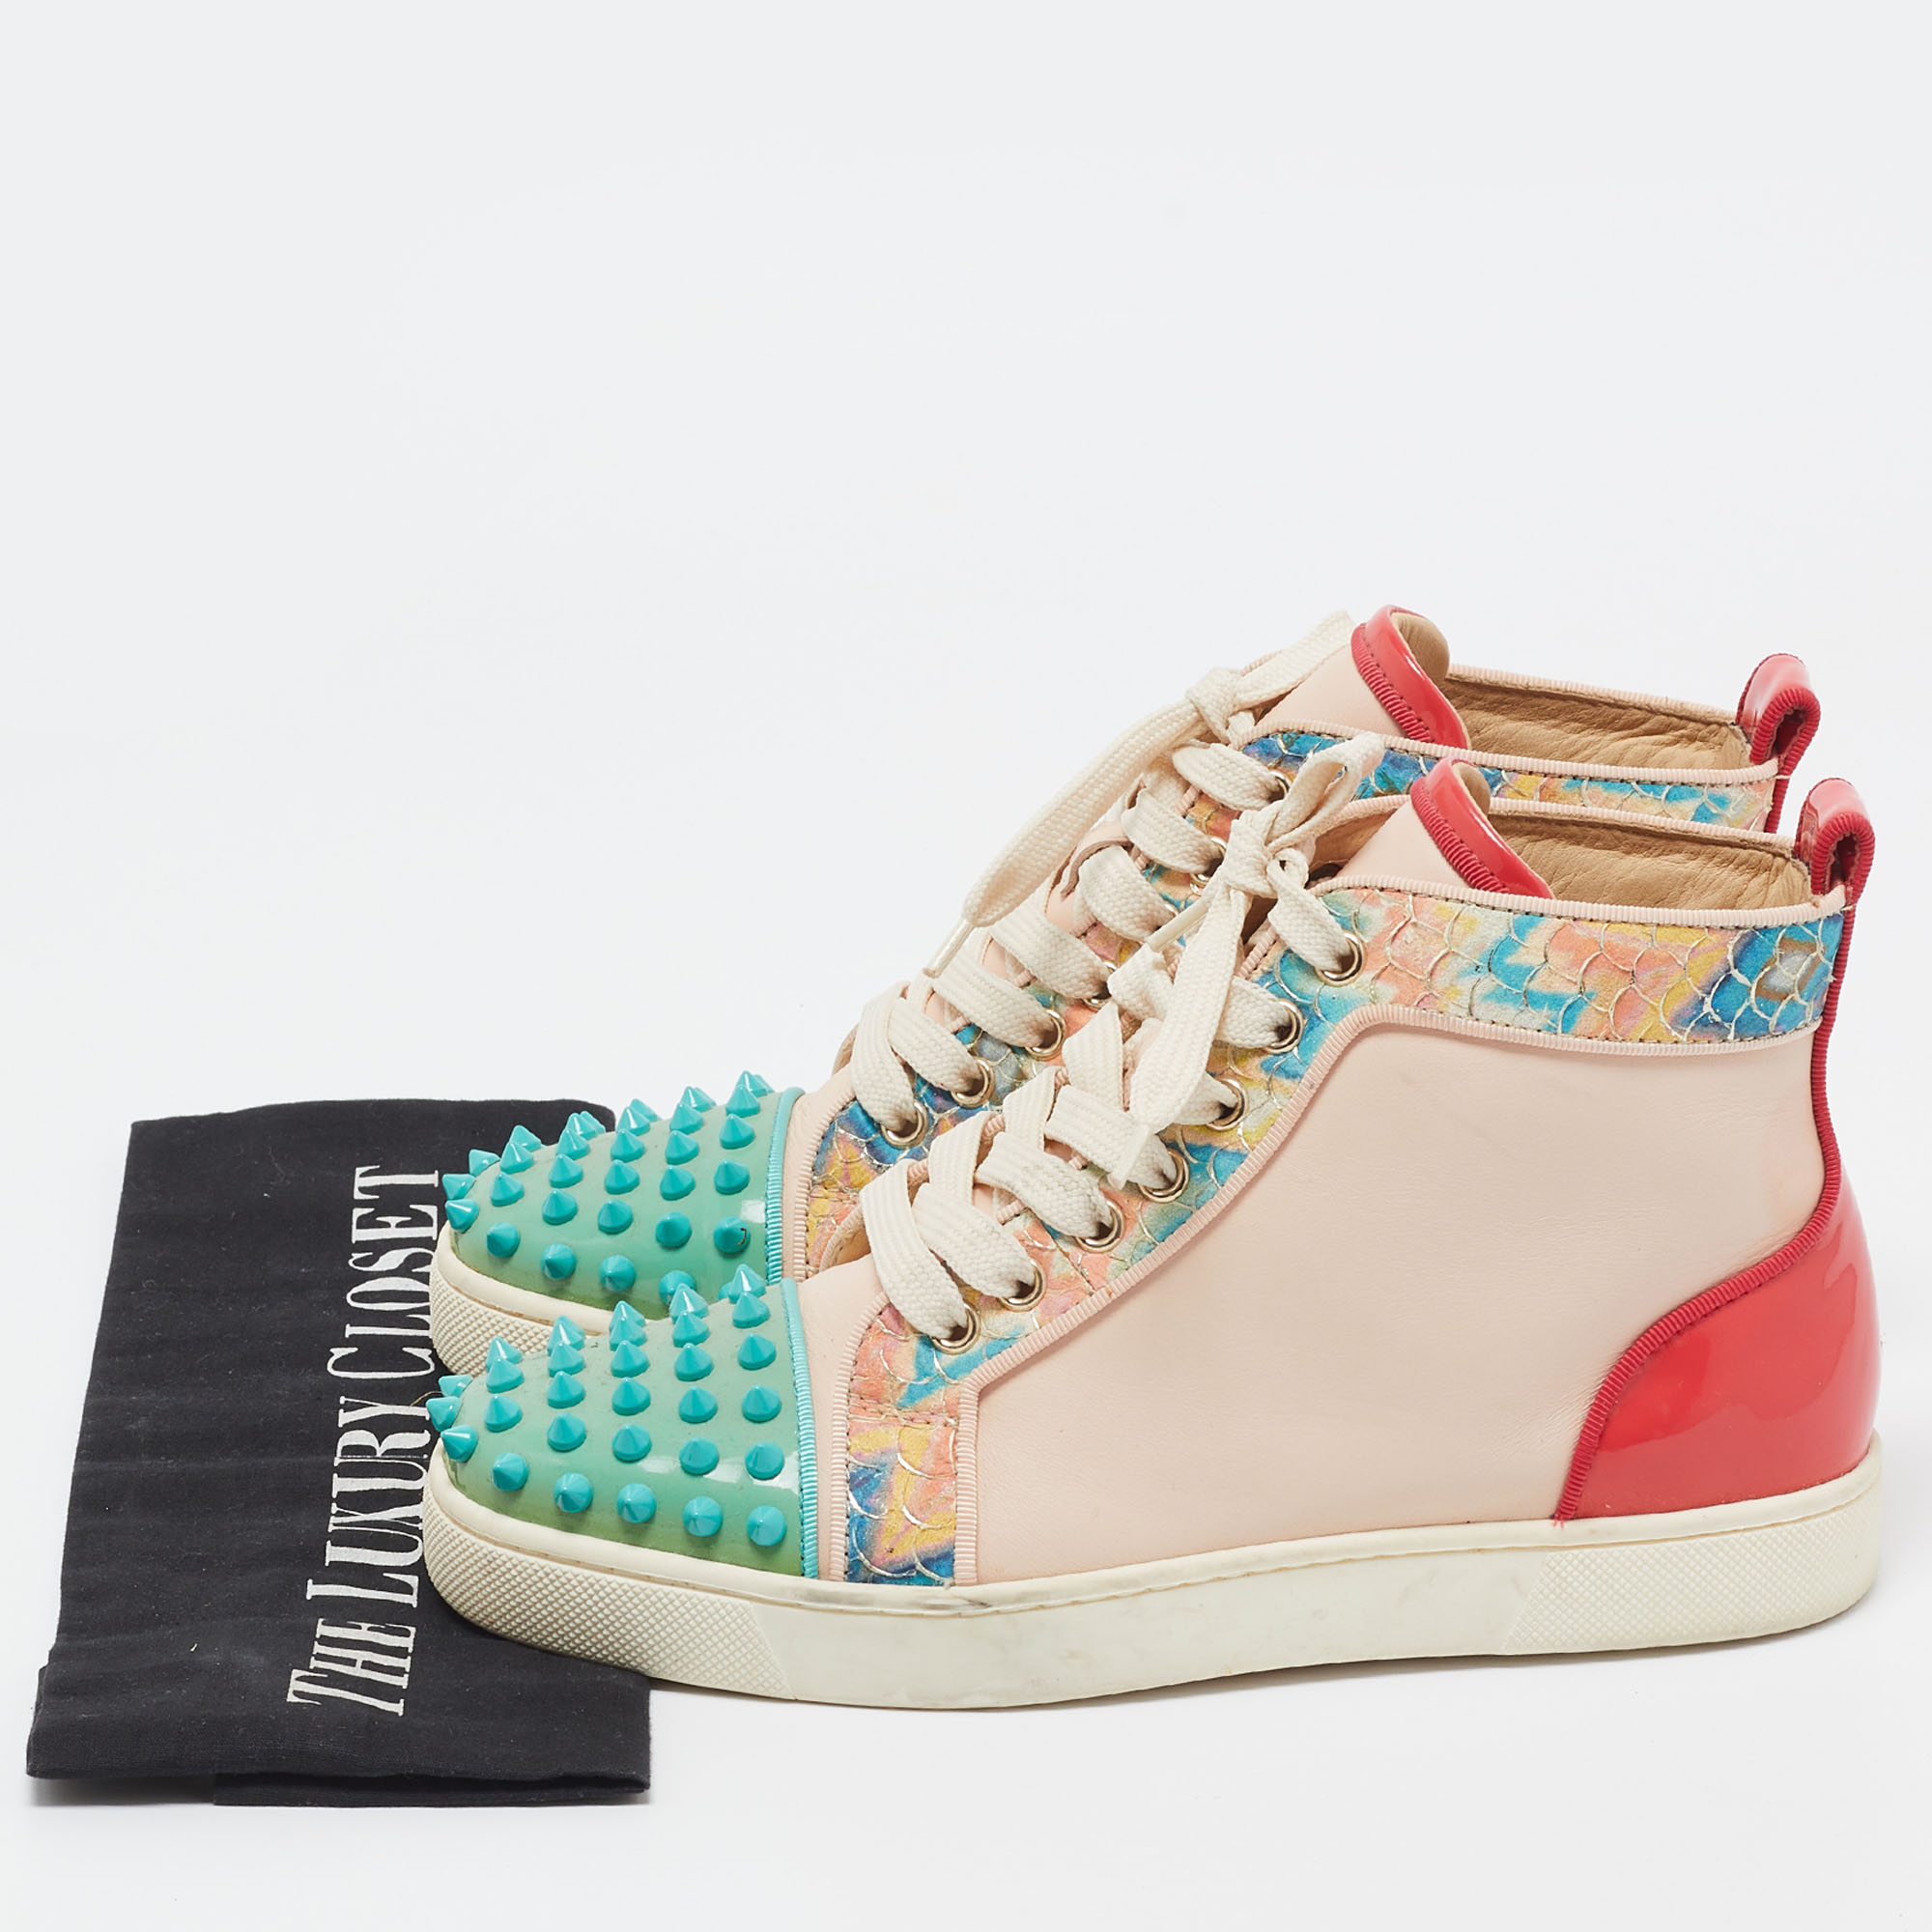 Christian Louboutin Multicolor Patent And Leather Louis Spikes High Top Sneakers Size 36.5